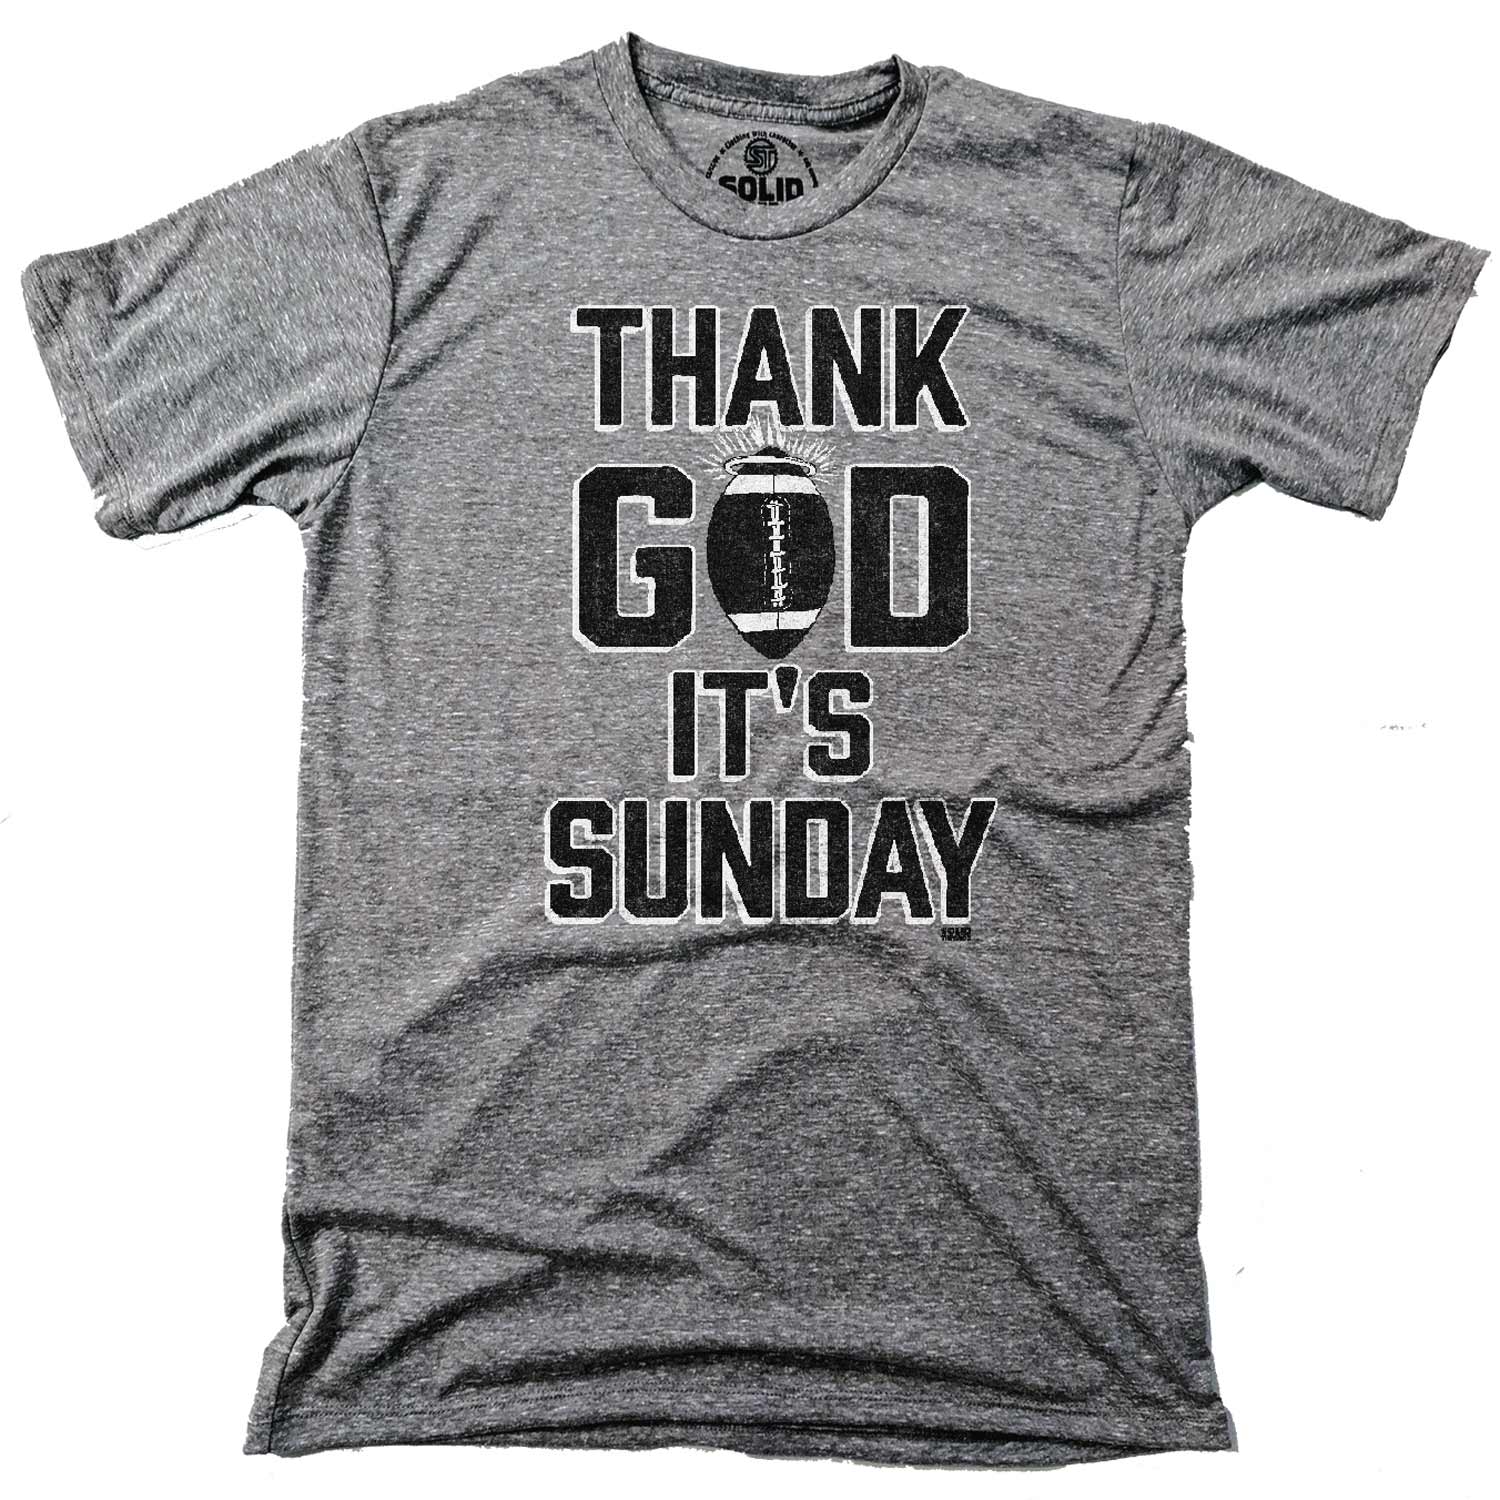 Men's Thank God It's Sunday Vintage Graphic T-Shirt | Funny NFL Season Tee | Solid Threads